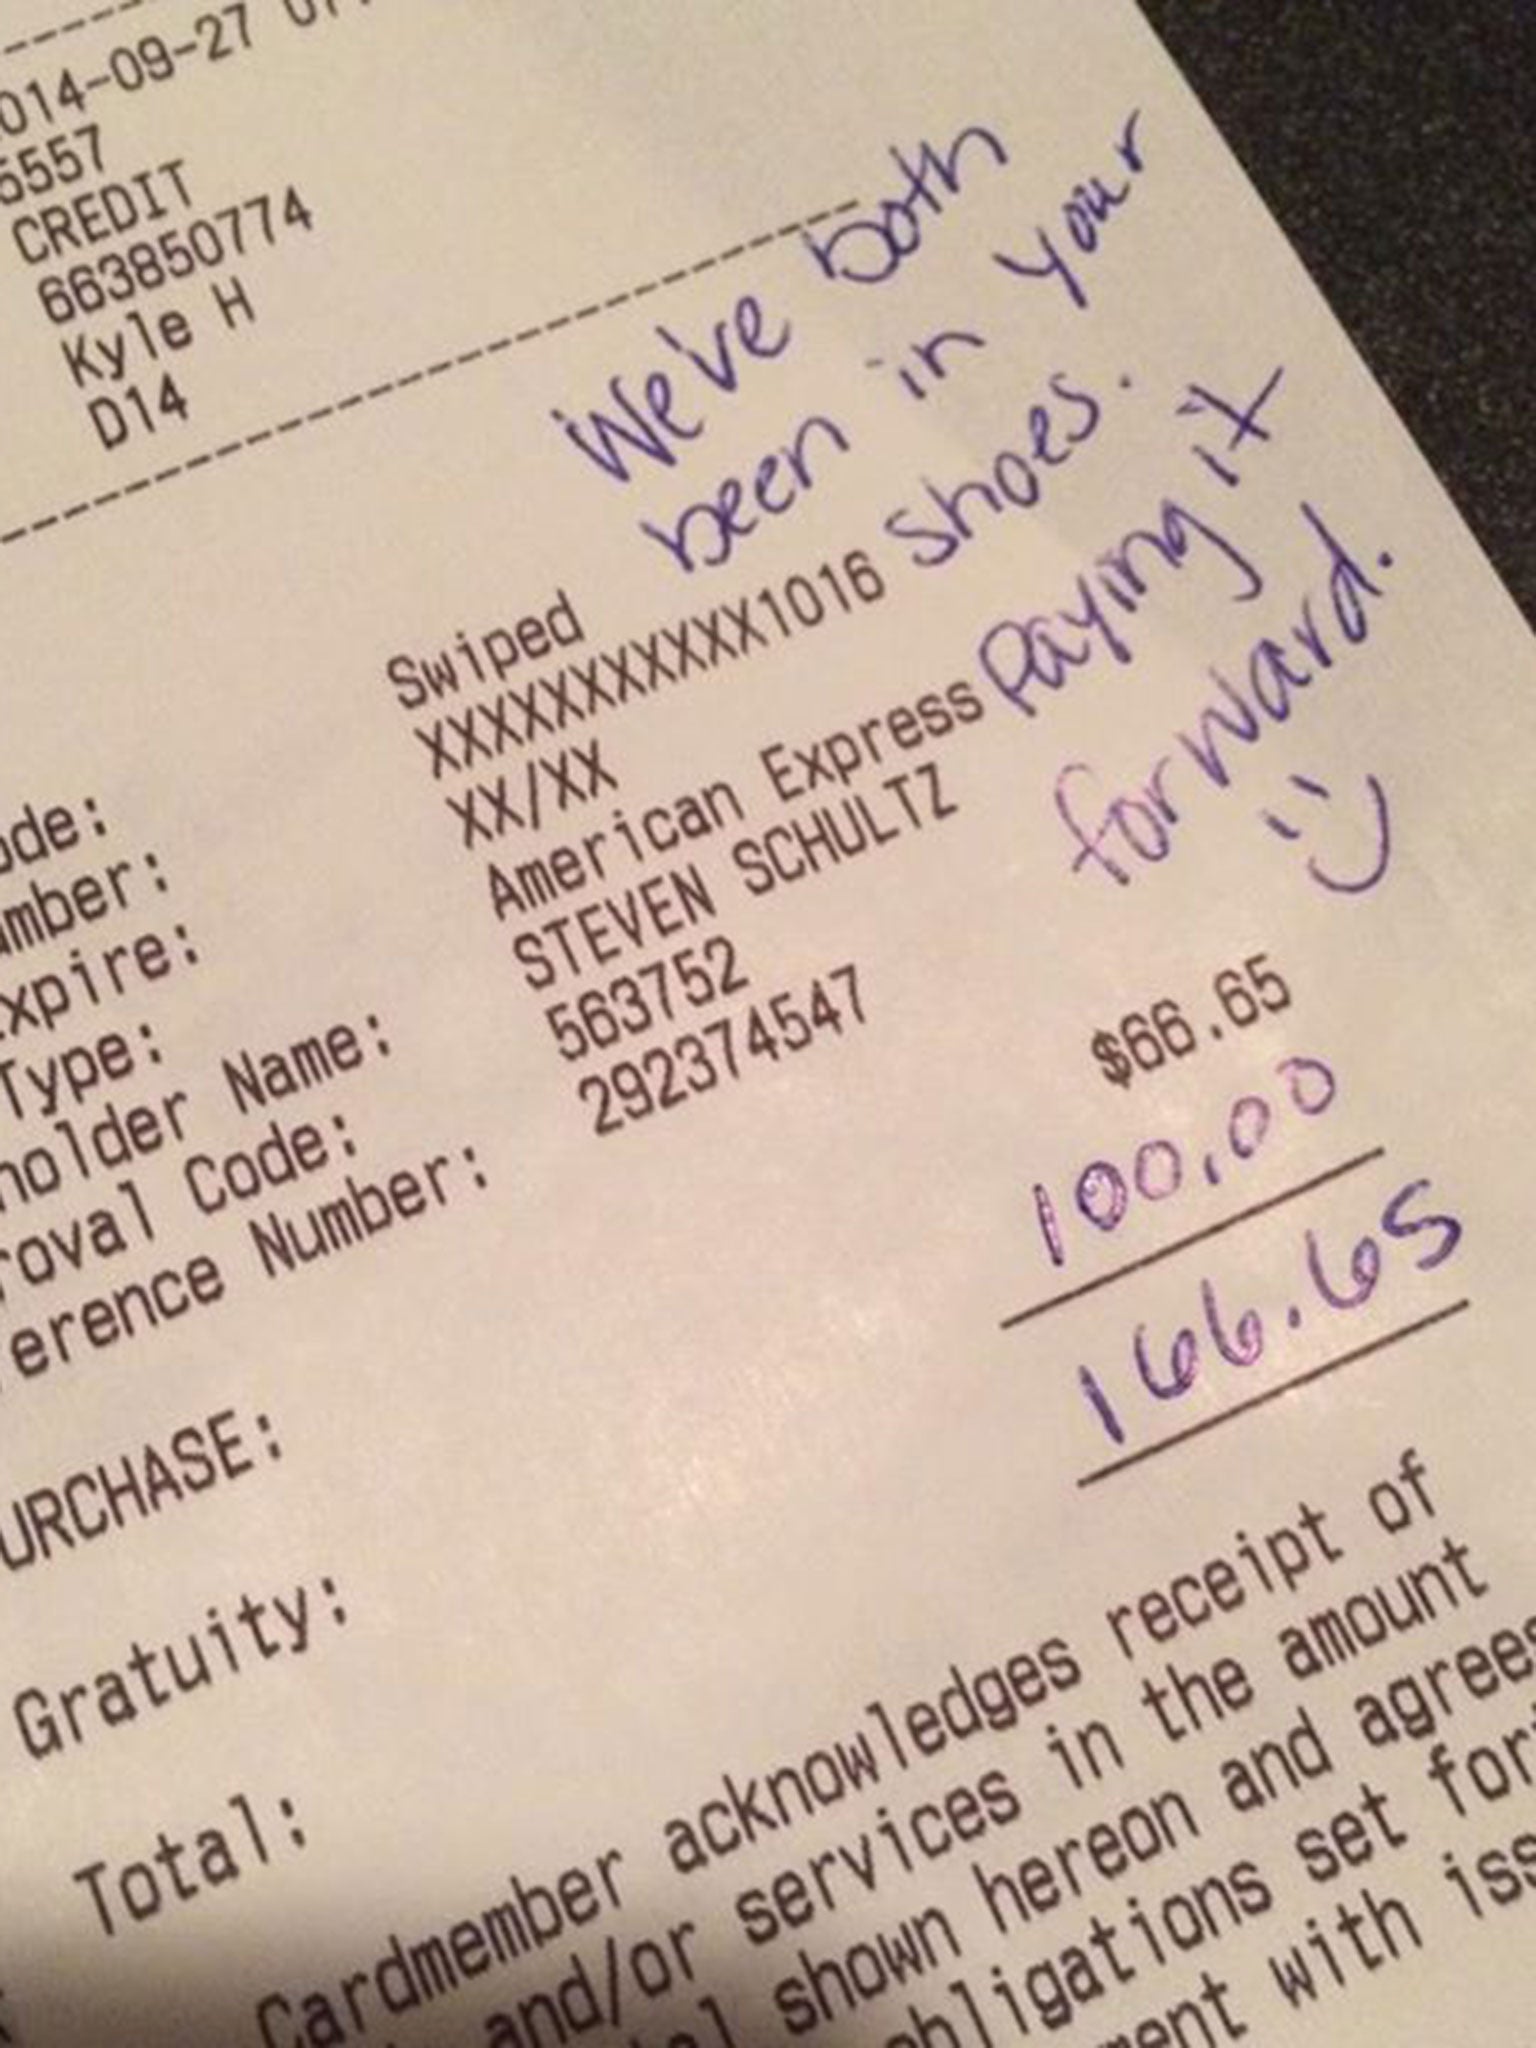 A couple who received “pretty terrible” service at a restaurant say they left a $100 (£61) tip to the waiter as their way of paying it forward